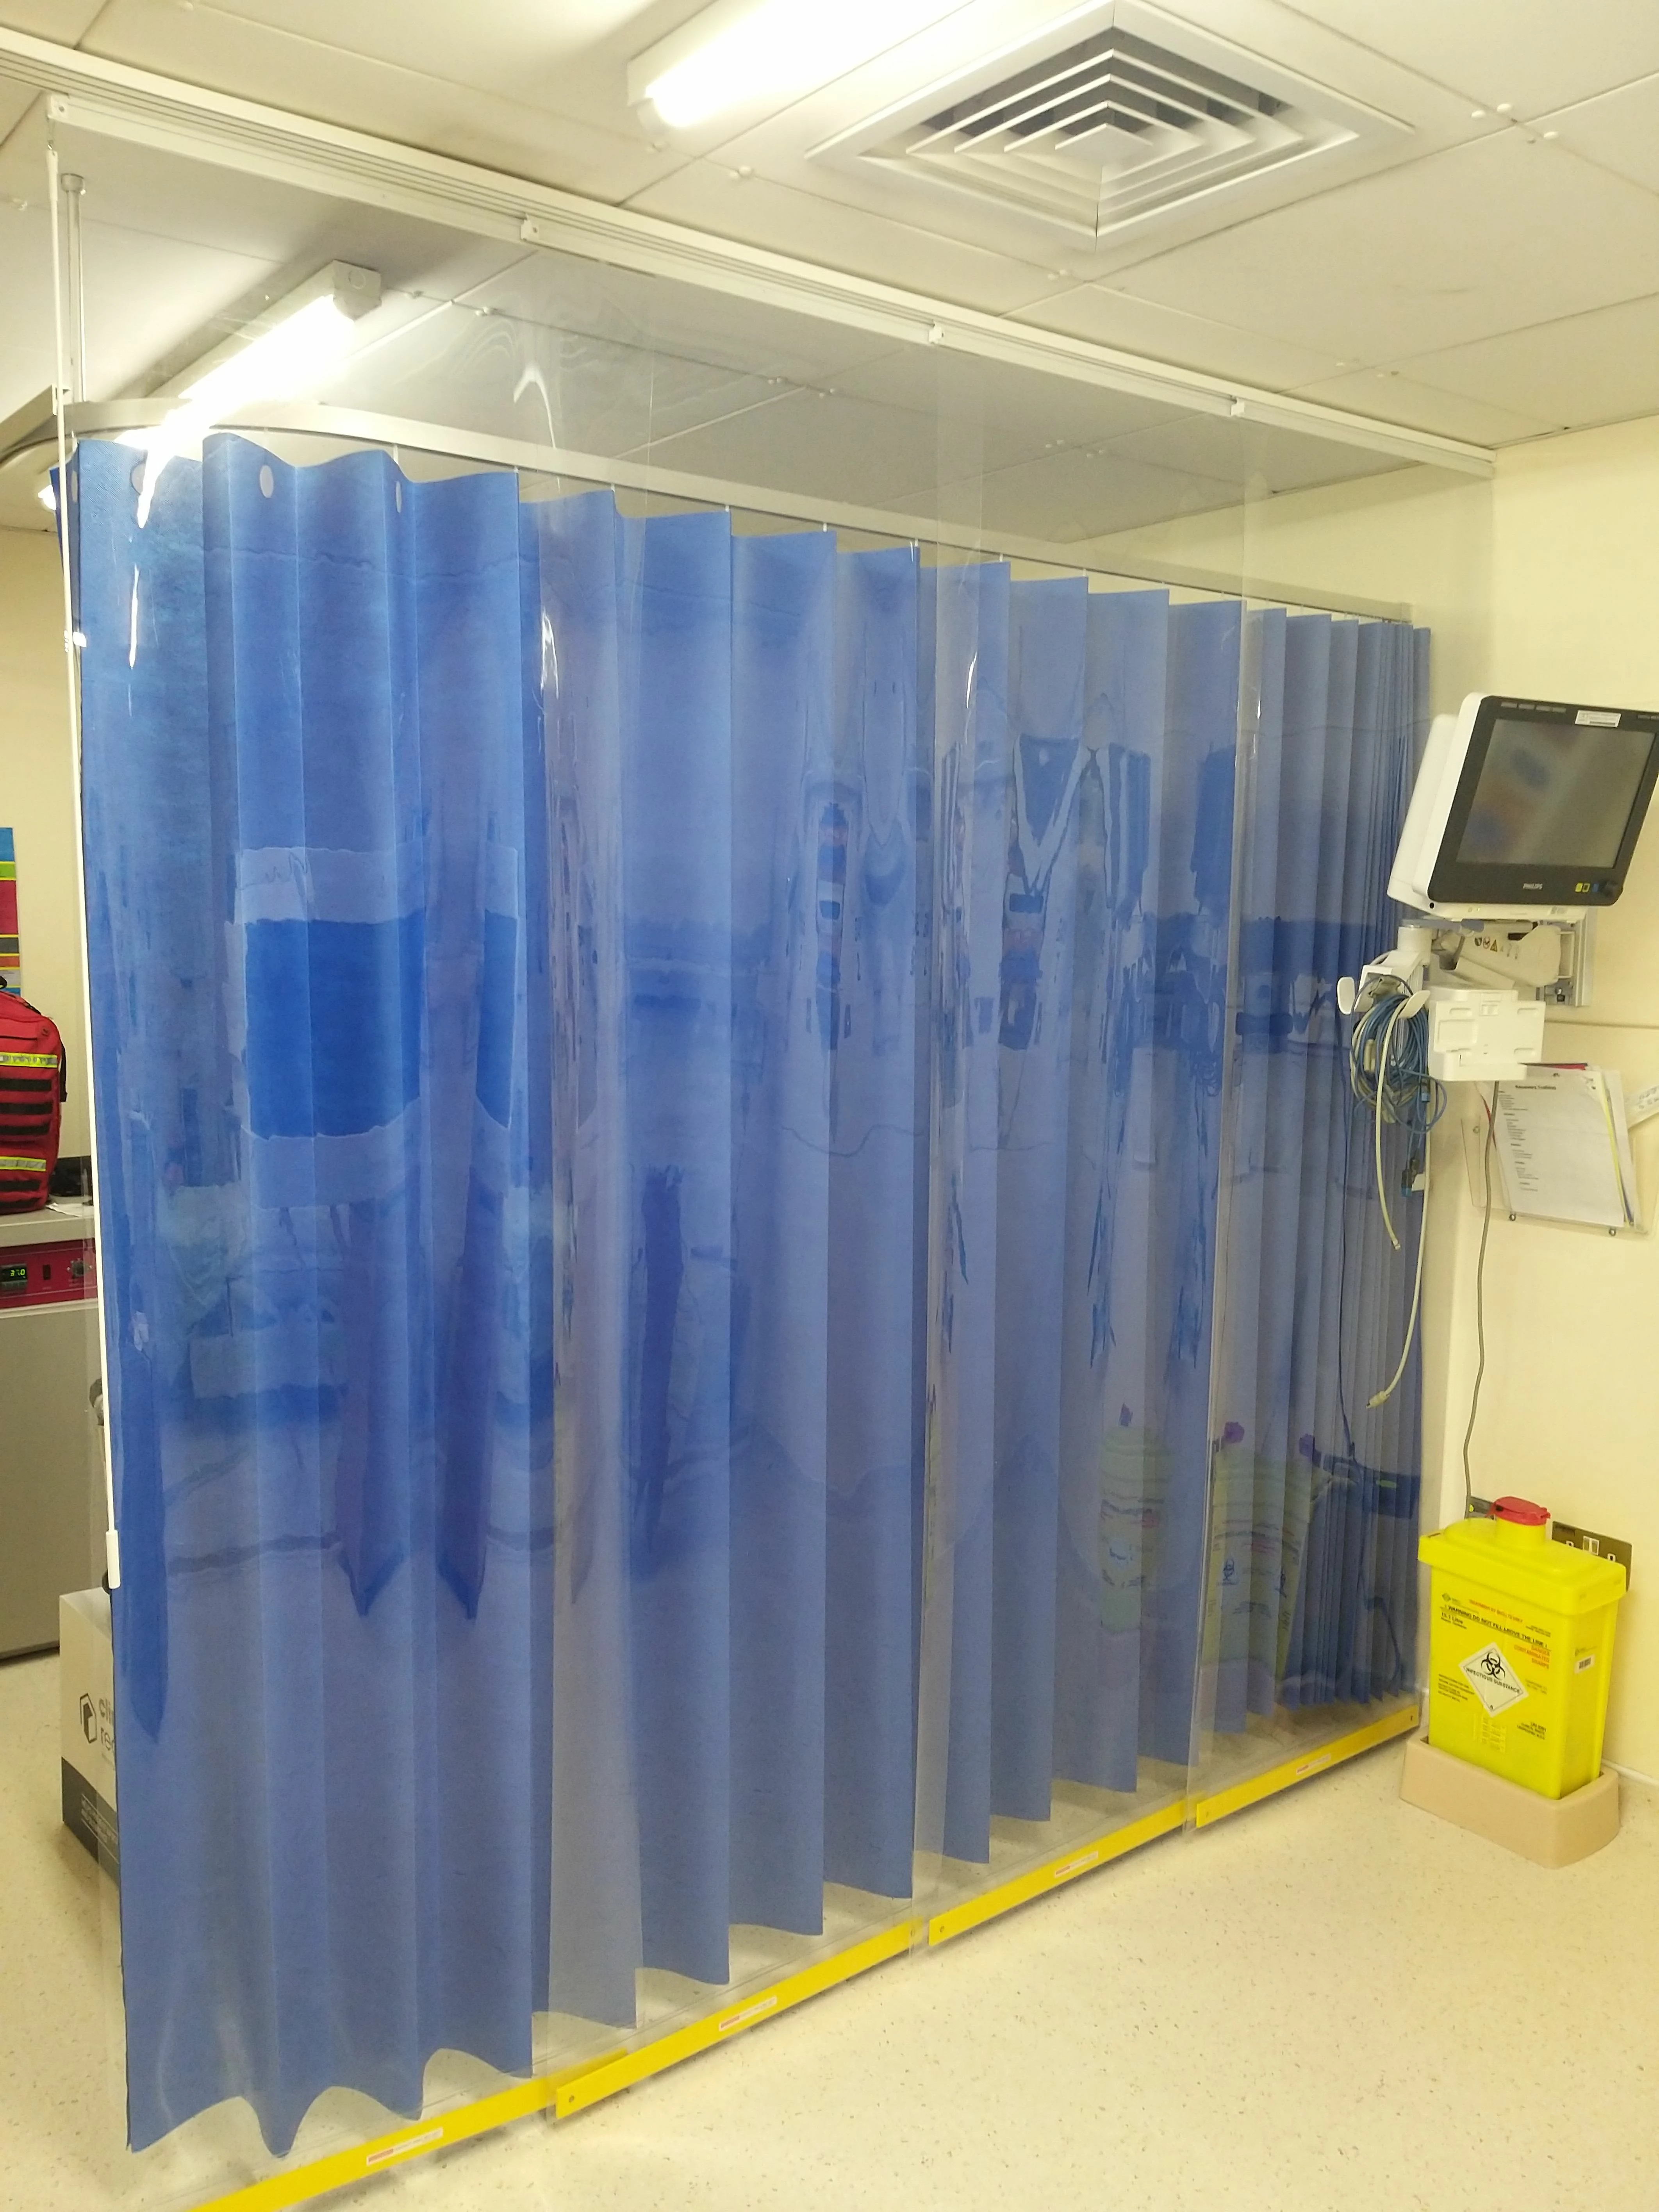 Tritonpeak's retractable infection control screens helping increase NHS bed capacity